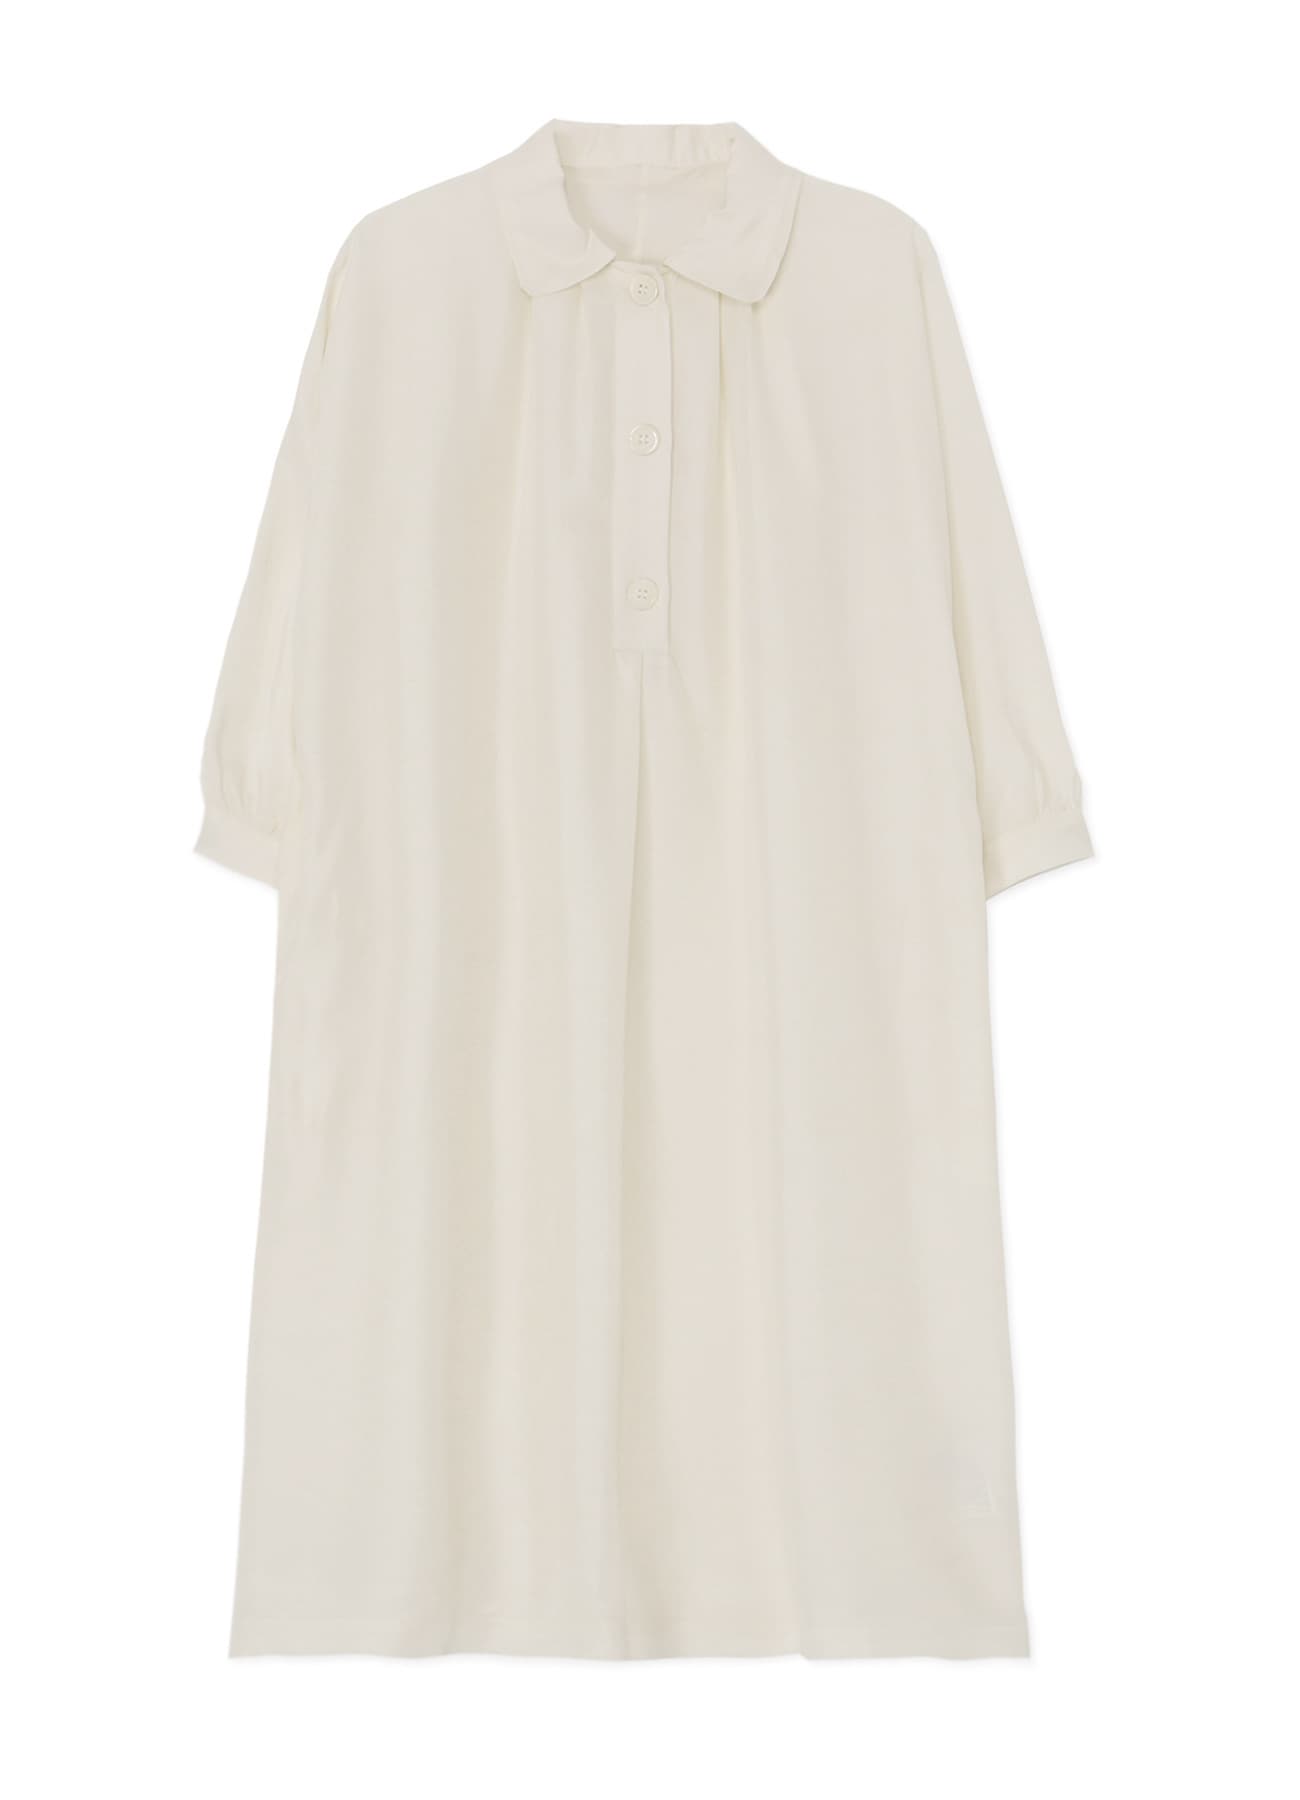 SILK WASHER ONE PIECE(FREE SIZE Ivory): Y's for living｜THE SHOP